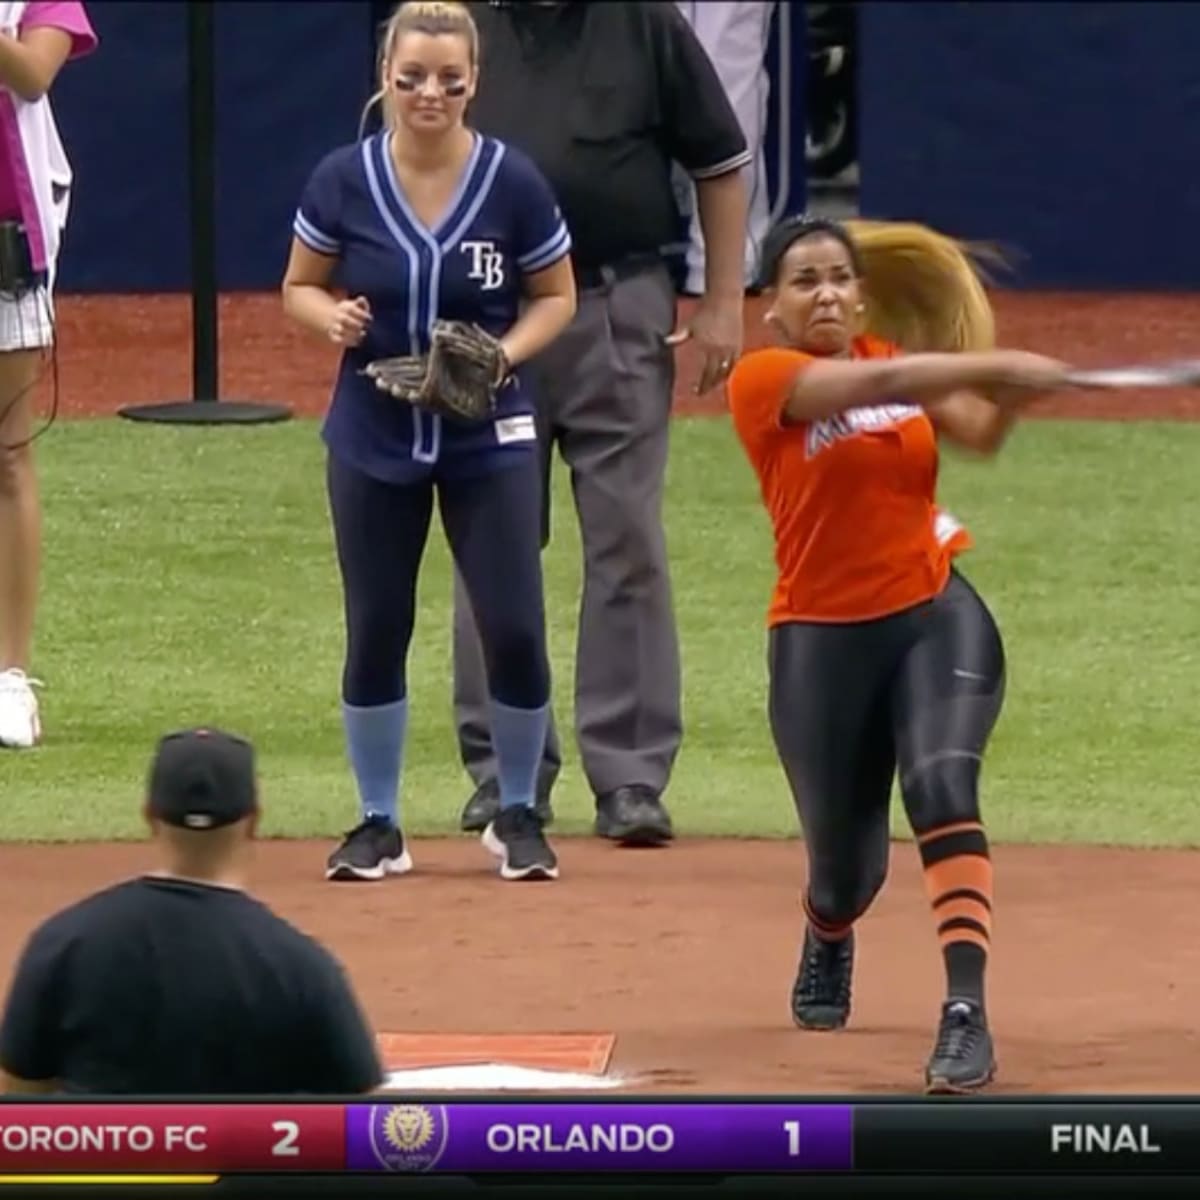 Marcell Ozuna's wife Genesis hits home run (video) - Sports Illustrated